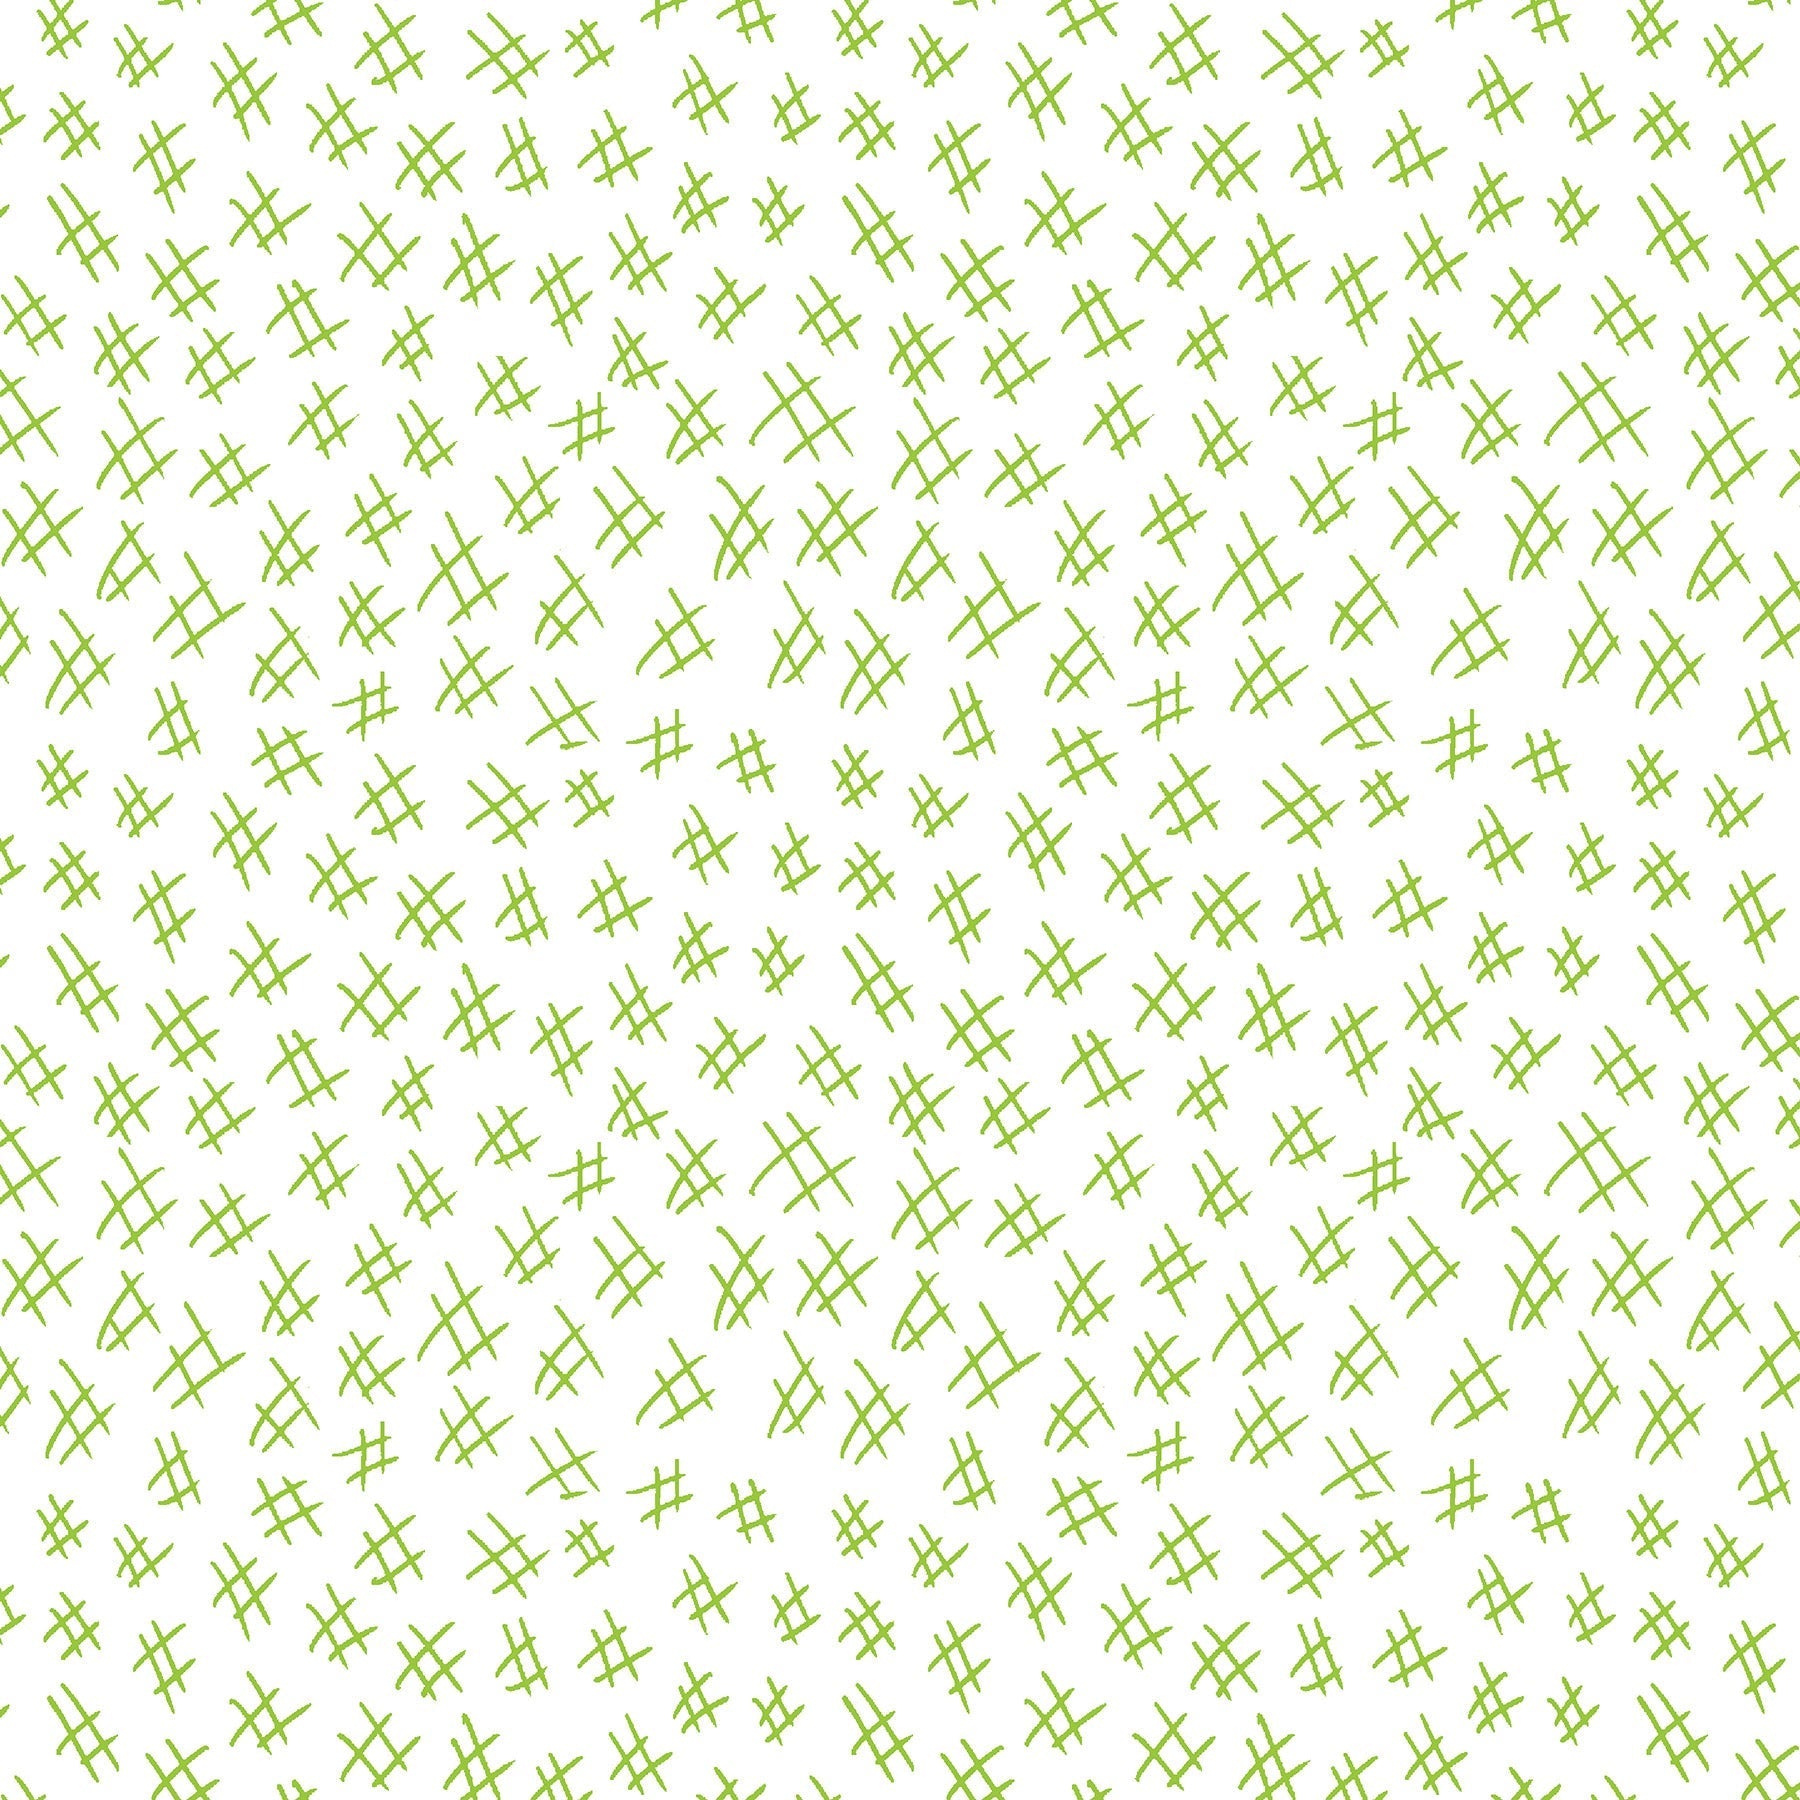  Hashtags in lime and white (13263-40)  is from Stitchy by Christa Watson for Benartex. The hashtags print features a white background with lime hashtags to provide a light tone for the collection and will serve well as a background fabric, a contrast fabric, or any where the eye needs to rest in your project.